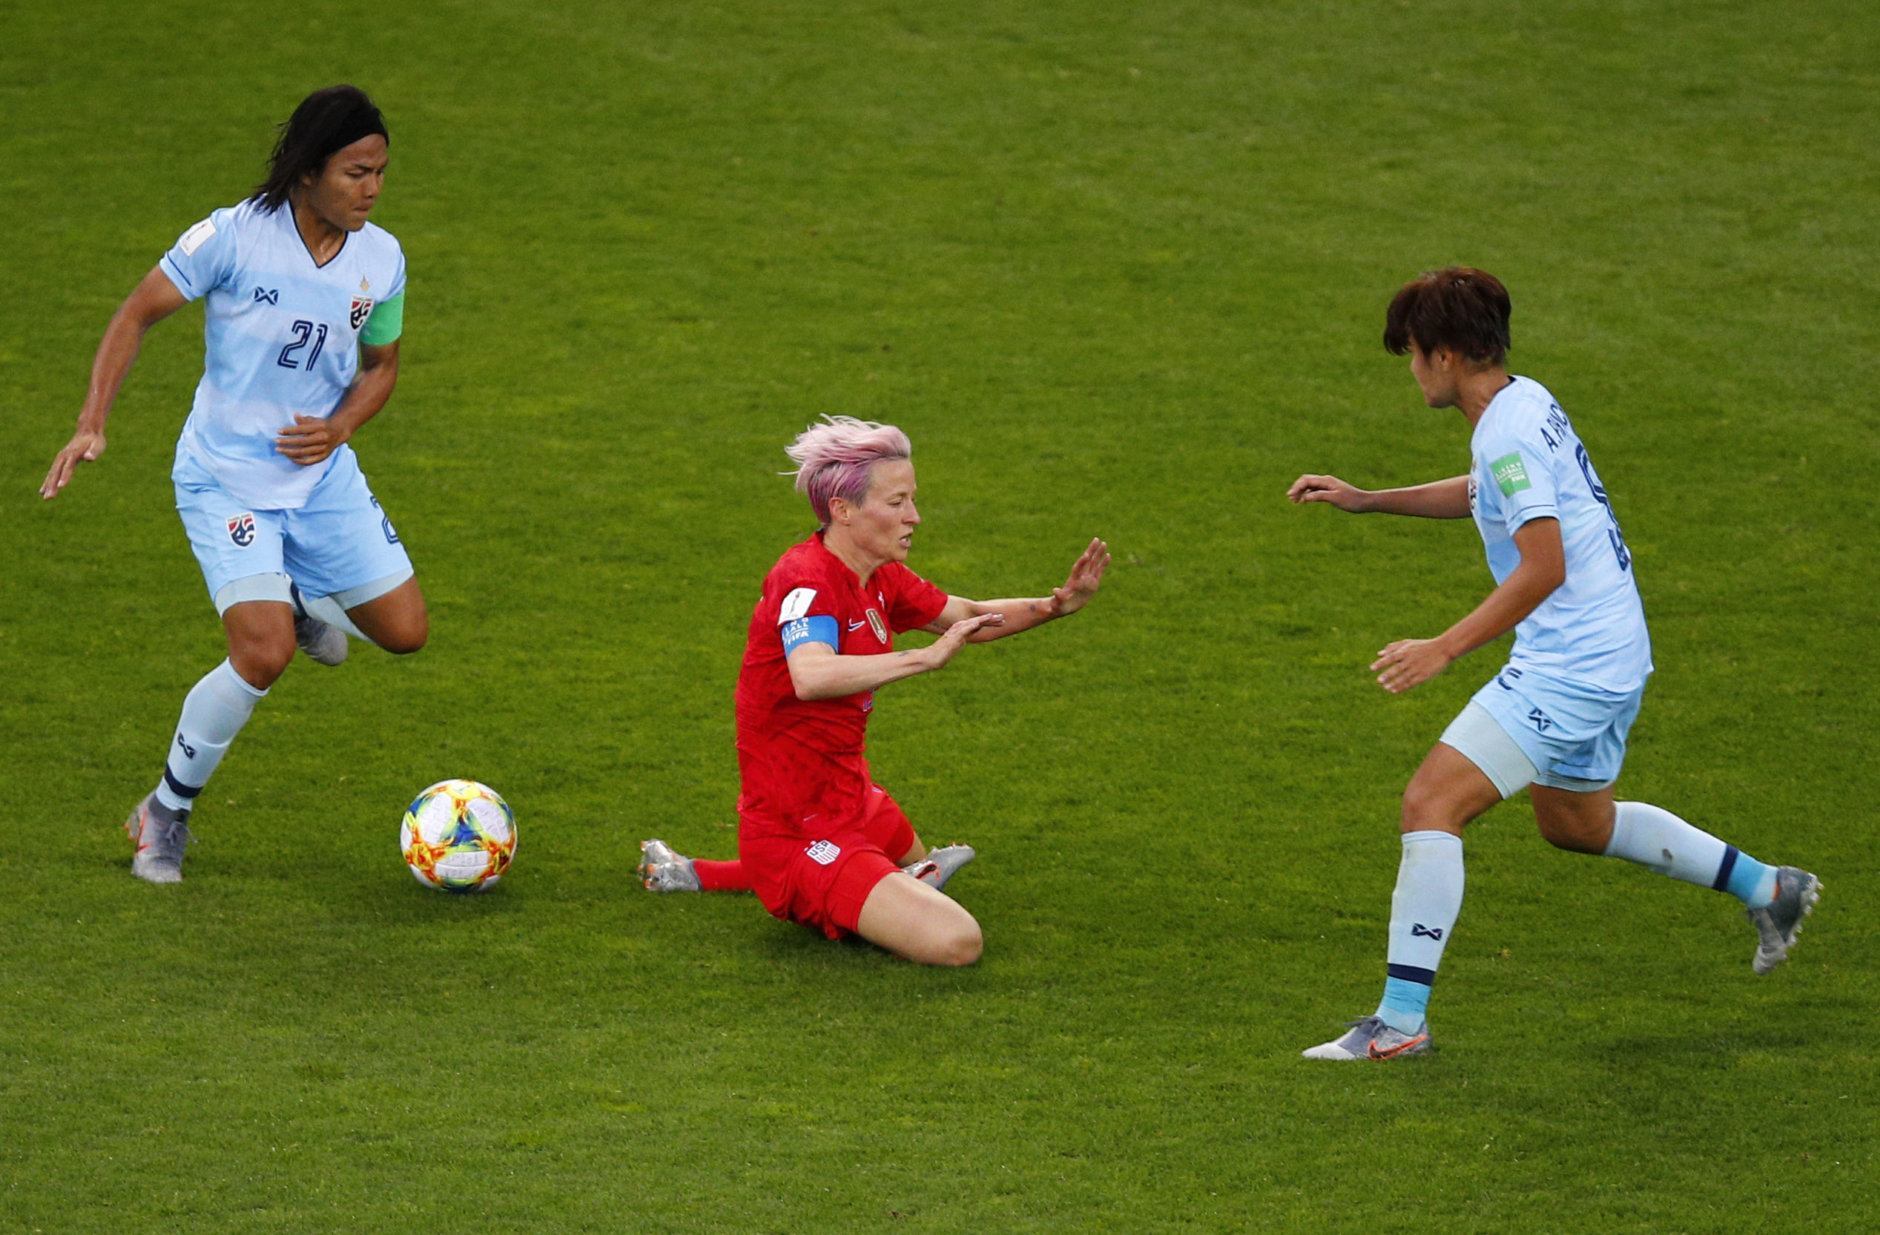 United States' Megan Rapinoe, centre, falls as Thailand's Kanjana Sung-Ngoen, left, and Ainon Phancha chase the gal during the Women's World Cup Group F soccer match between the United States and Thailand at the Stade Auguste-Delaune in Reims, France, Tuesday, June 11, 2019. (AP Photo/Francois Mori)